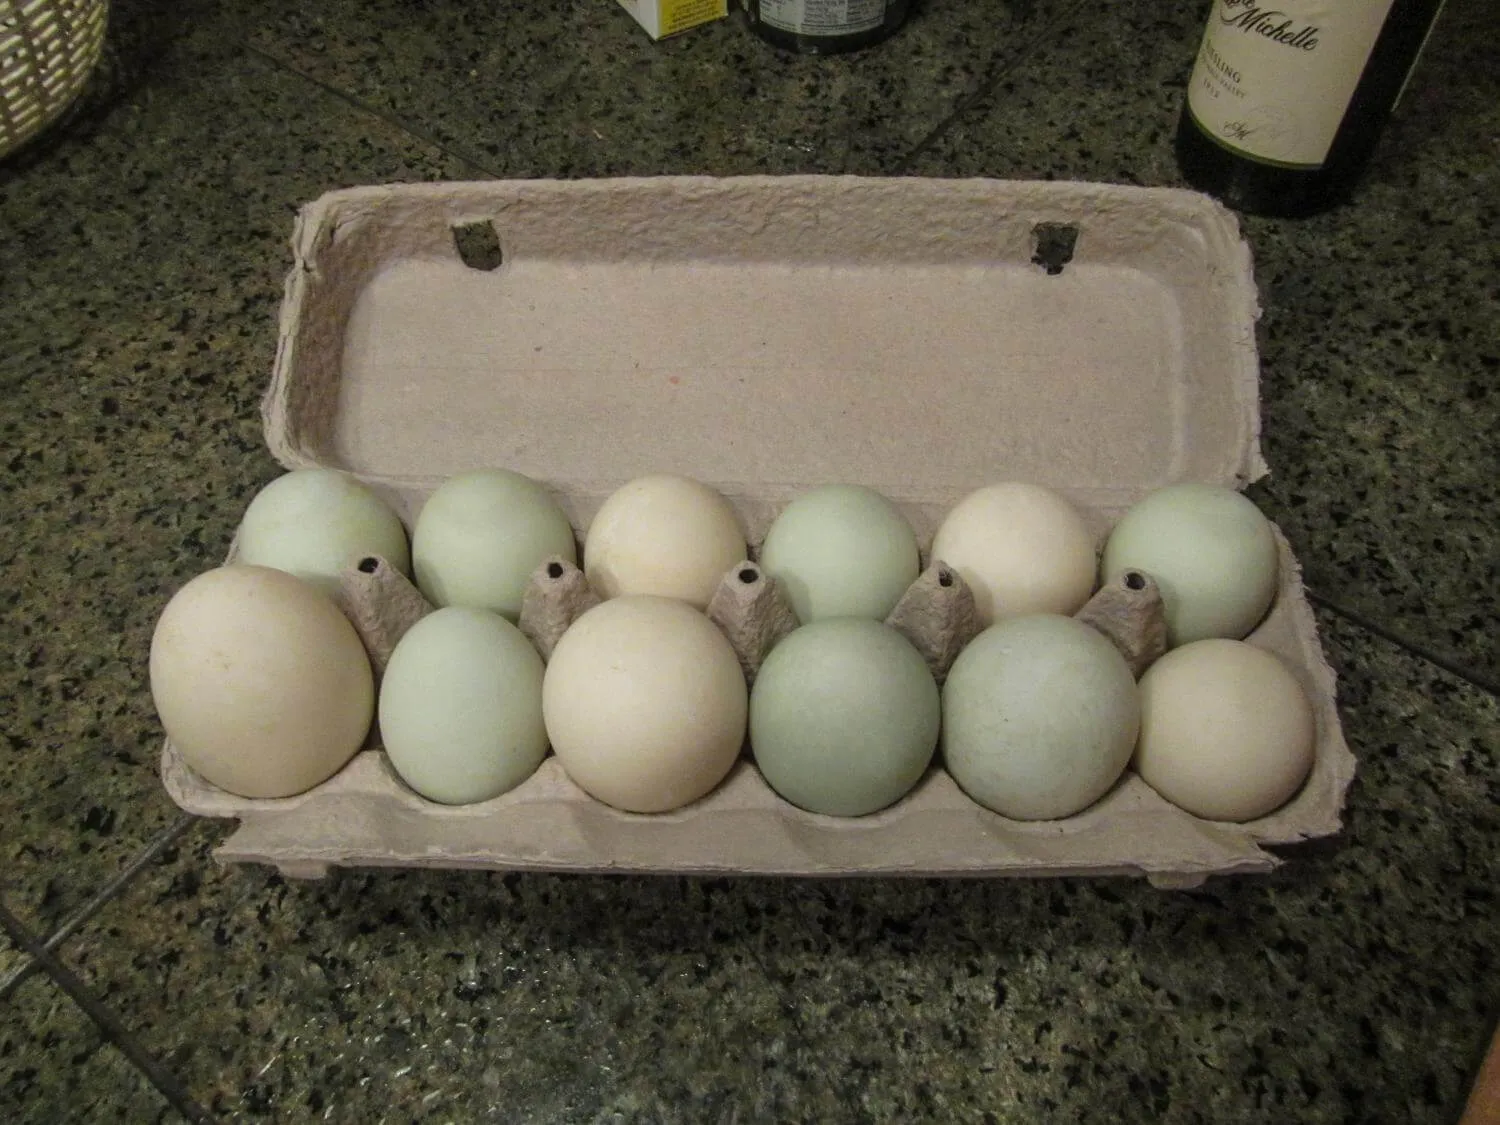 green and white duck eggs in carton